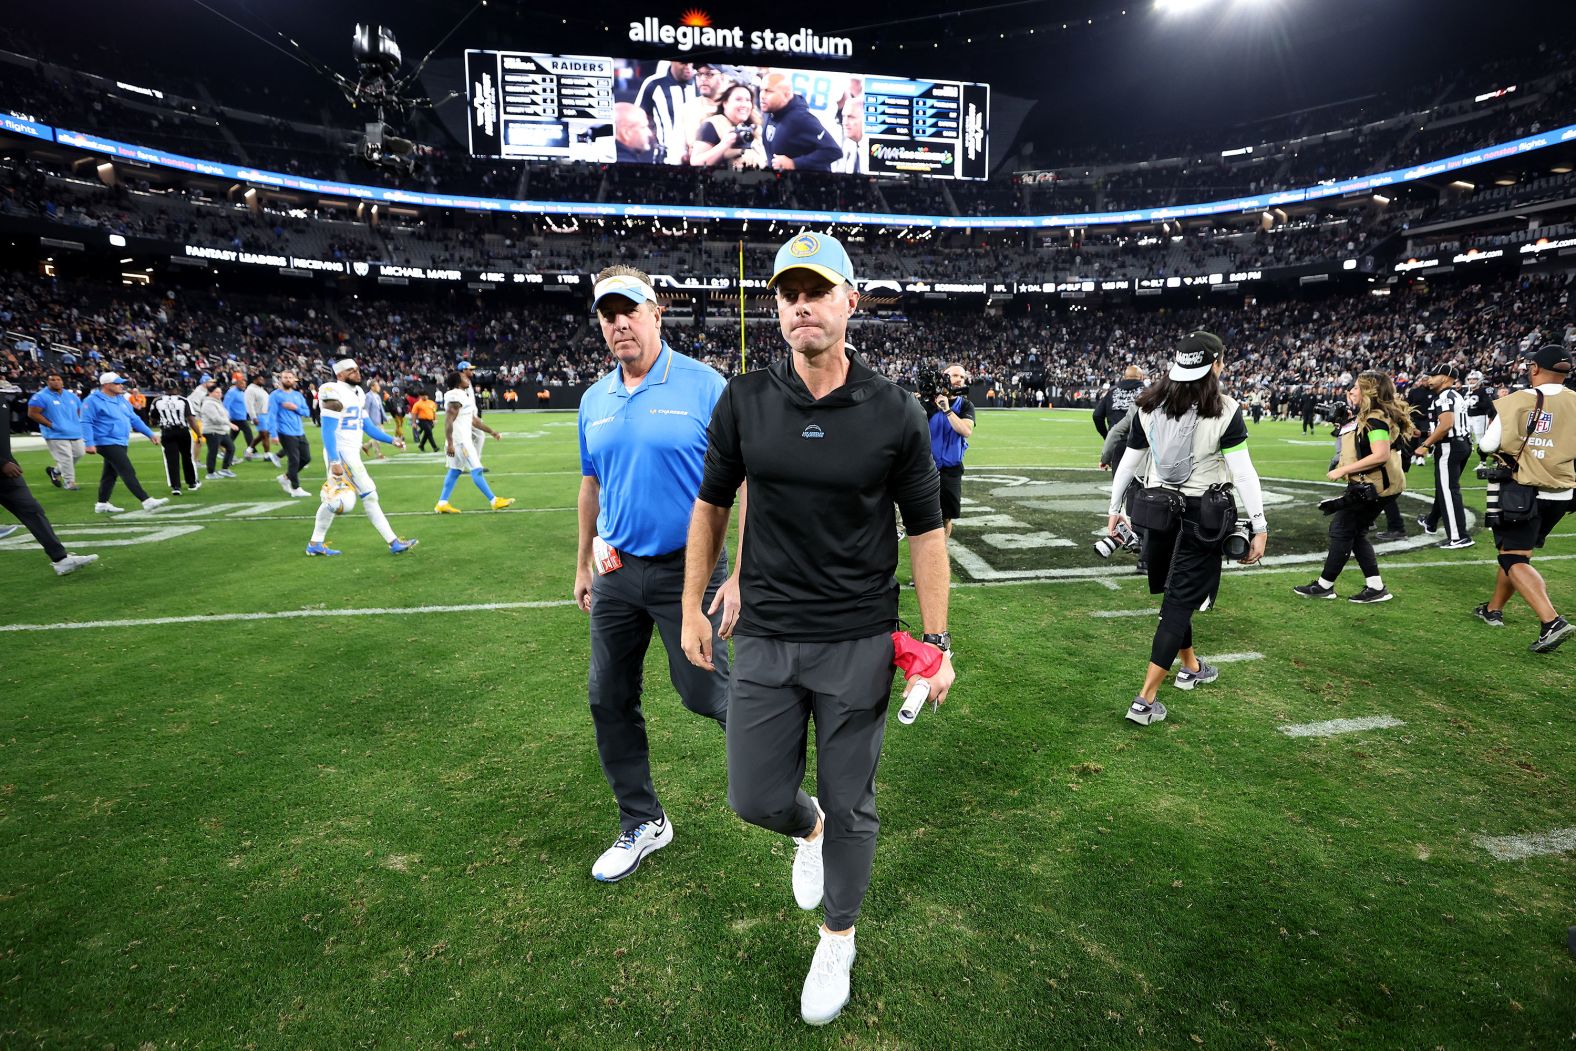 Los Angeles Chargers head coach Brandon Staley walks off of the field after losing 63-21 to the Las Vegas Raiders on Thursday, December 14. <a href="https://www.cnn.com/2023/12/15/sport/los-angeles-chargers-fire-brandon-staley-tom-telesco-spt-intl/index.html" target="_blank">Staley and general manager Tom Telesco were fired the next day</a>. The game was a franchise record for points scored by the Raiders, and a franchise worst for points allowed by the Chargers, <a href="https://www.nfl.com/news/rookie-qb-aidan-o-connell-propels-raiders-to-historic-blowout-over-chargers" target="_blank" target="_blank">per NFL.com</a>.